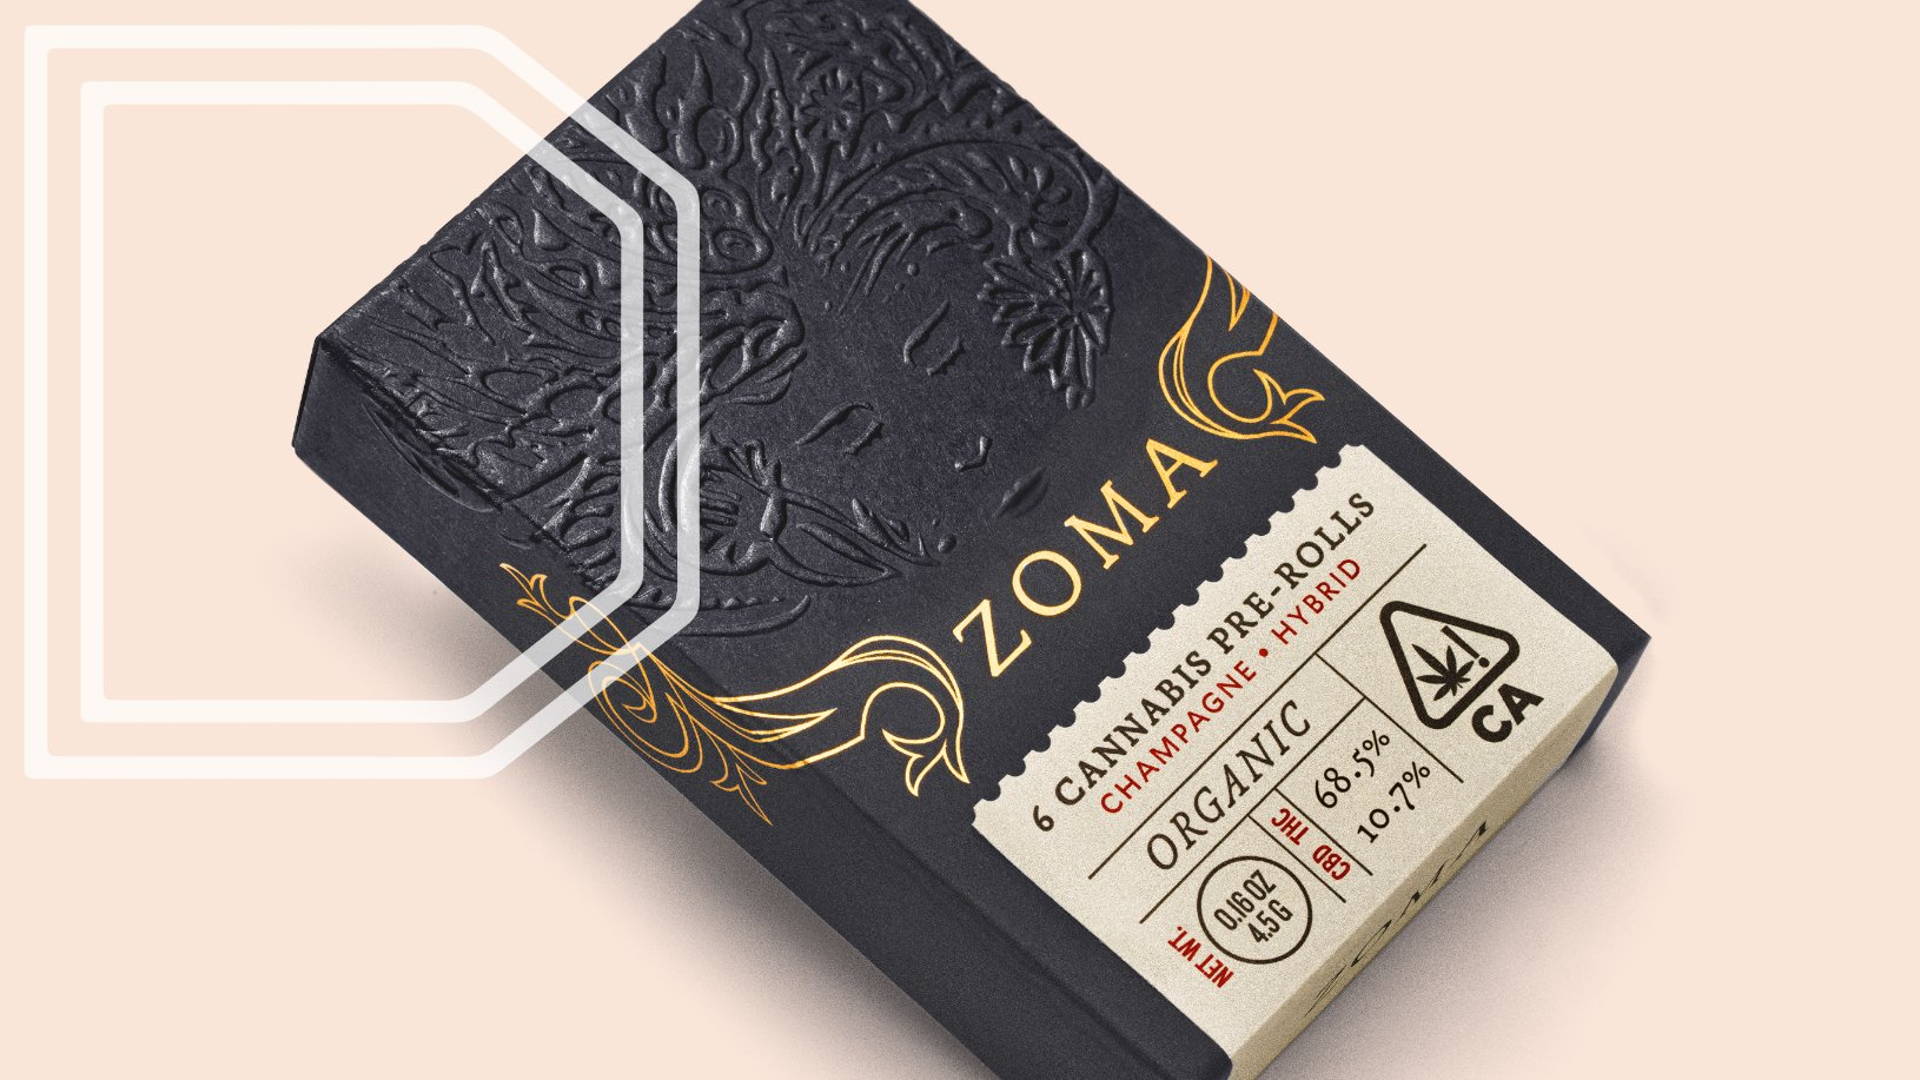 Featured image for The 2019 Dieline Neenah Paper Award Winner: Zoma Cannabis